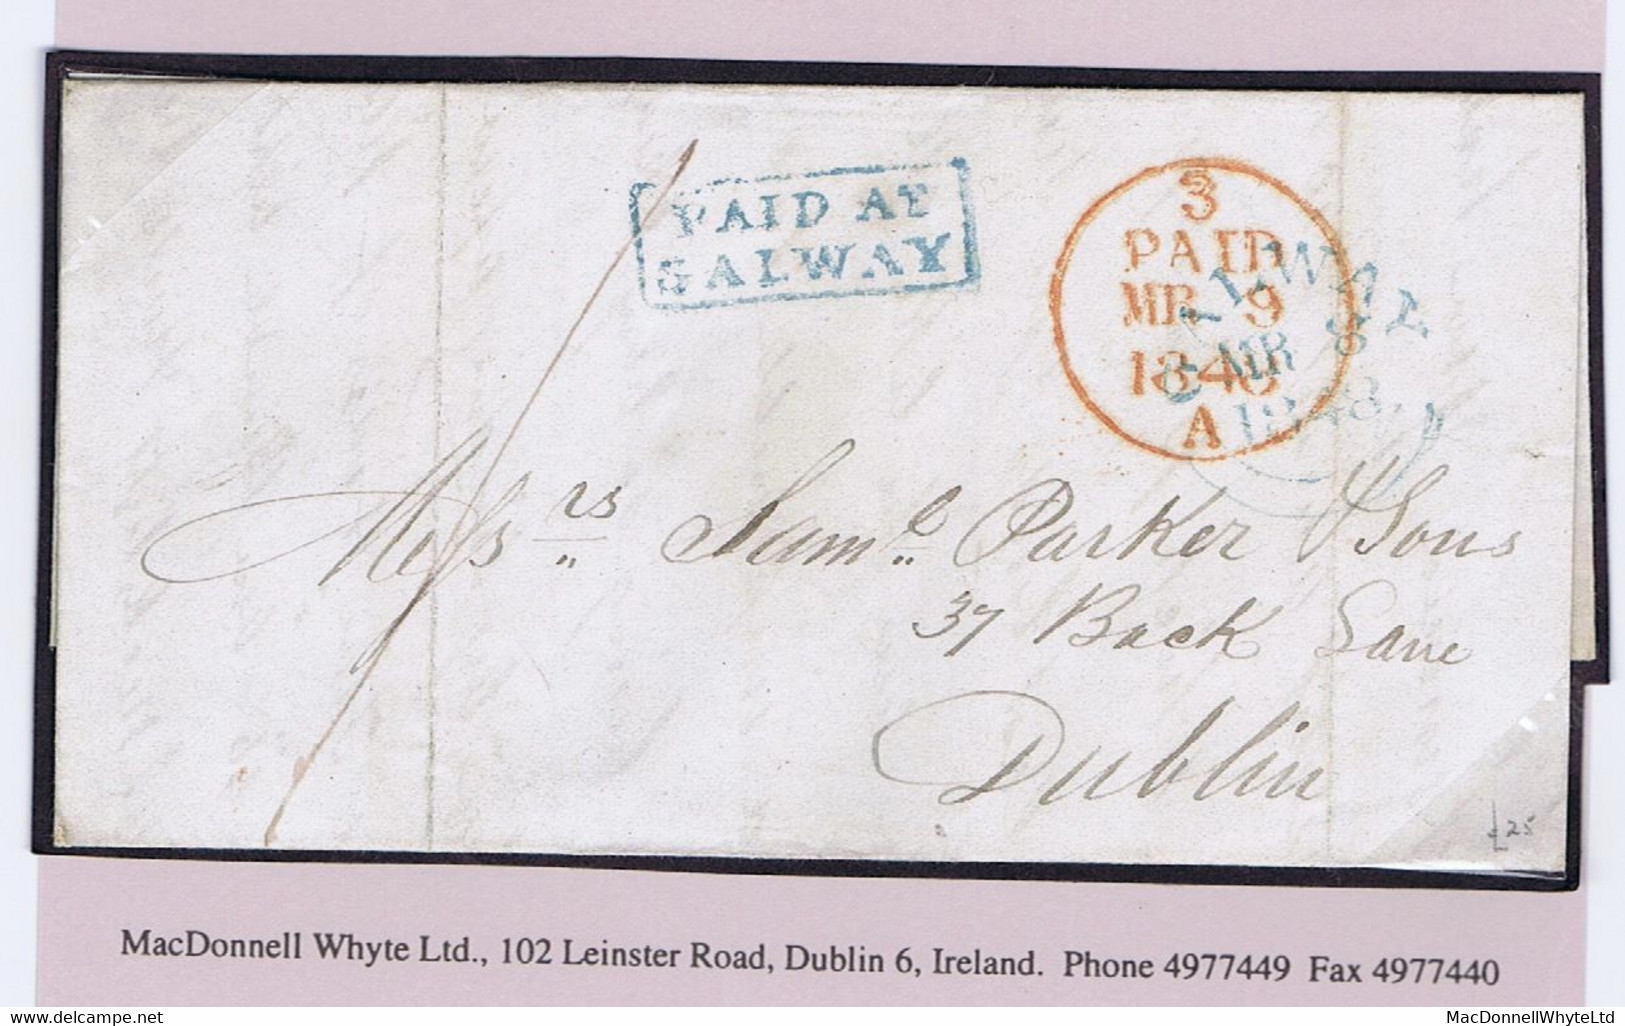 Ireland Galway 1848 Cover To Dublin Boxed 2-line PAID AT/GALWAY In Blue, Matching GALWAY MR 8 1848 Cds - Préphilatélie